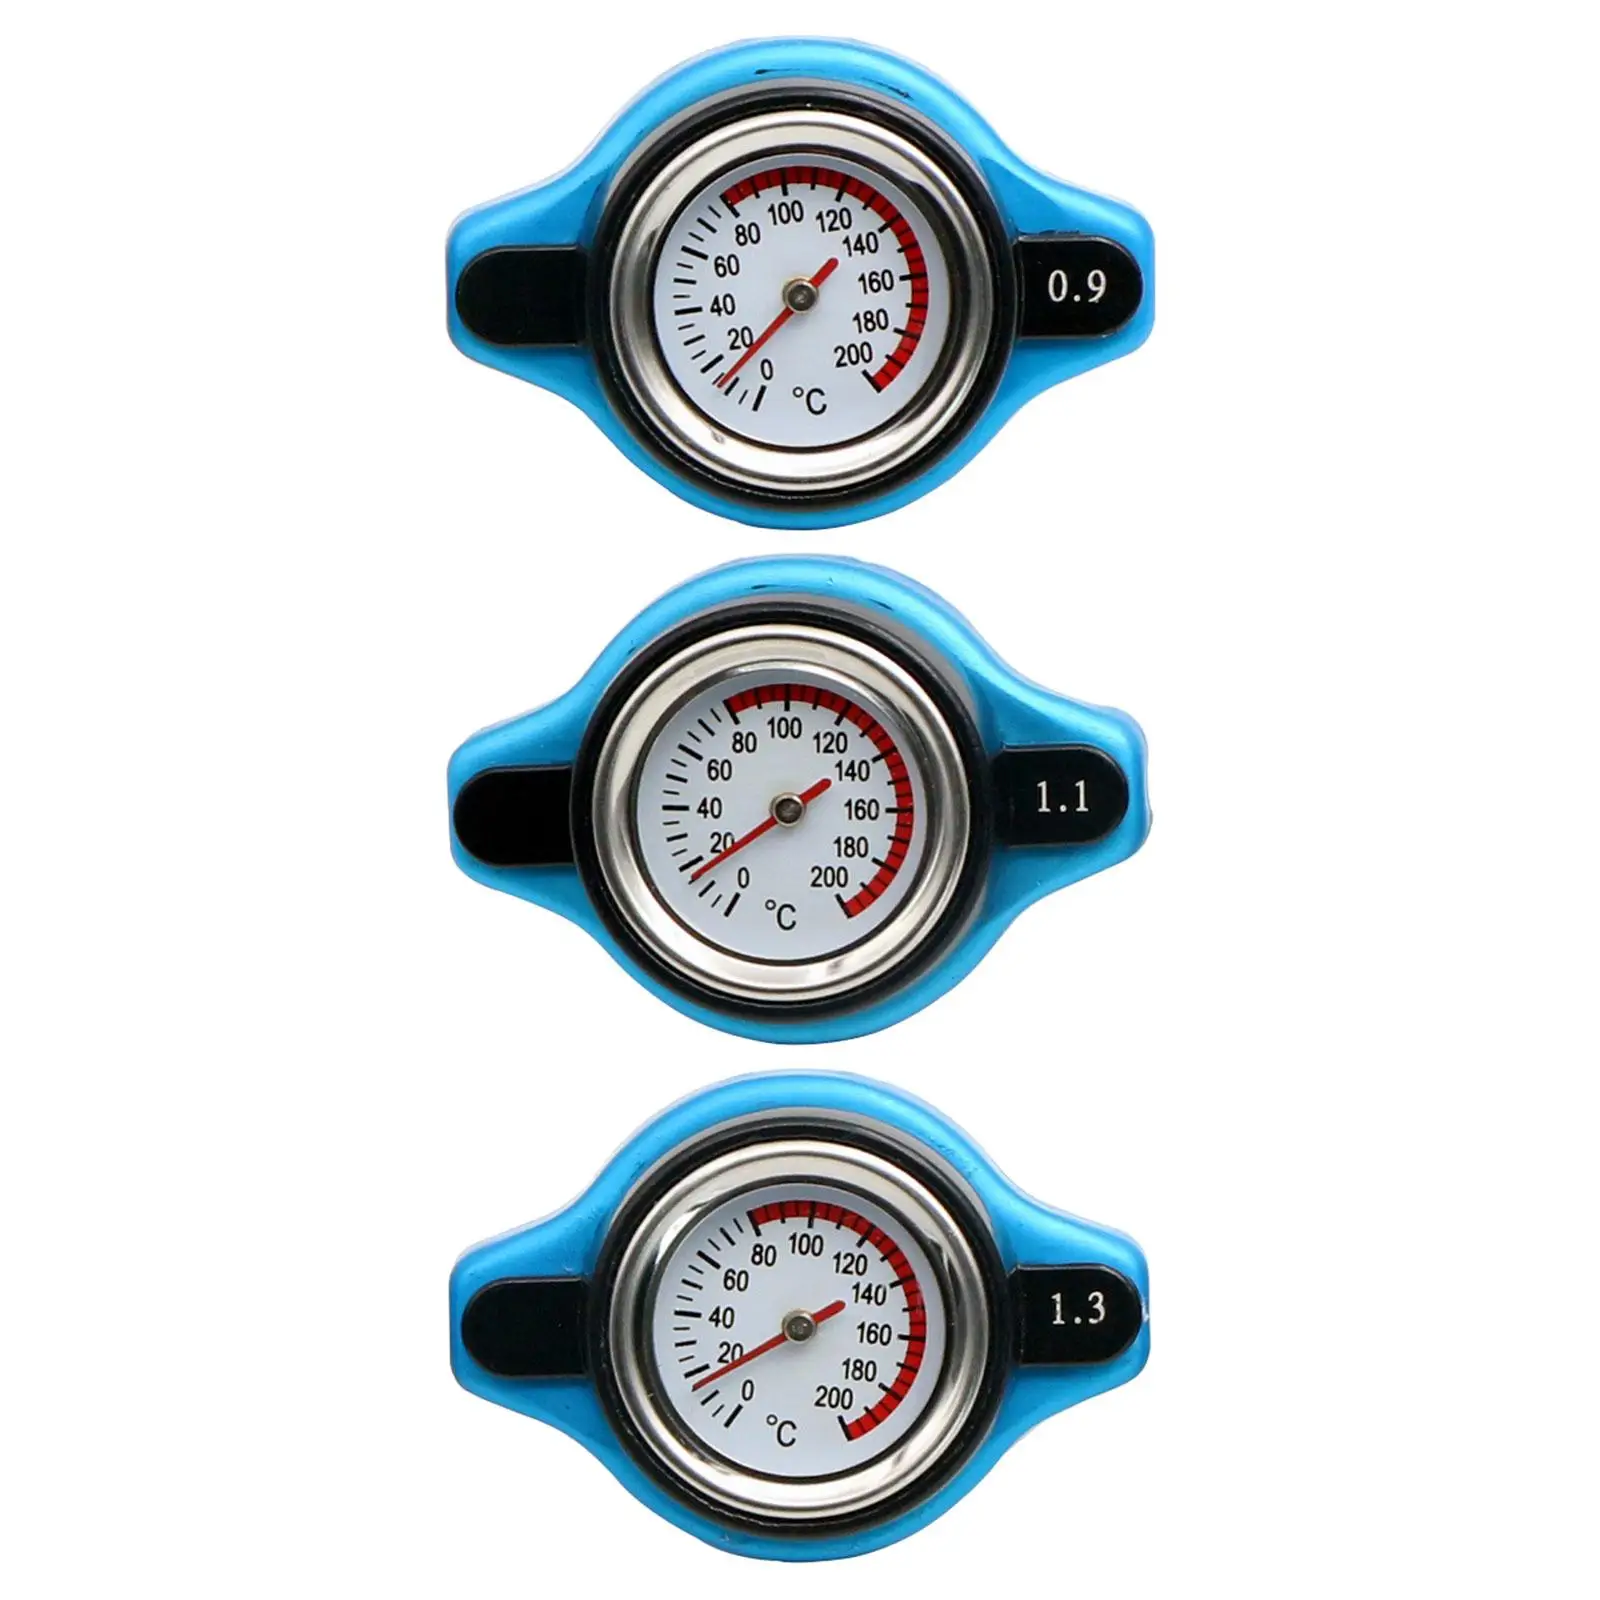 Car Thermostatic Gauge Radiator Cap Water Temperature Gauge High Performance Automobile Accessory Directly Replace Professional